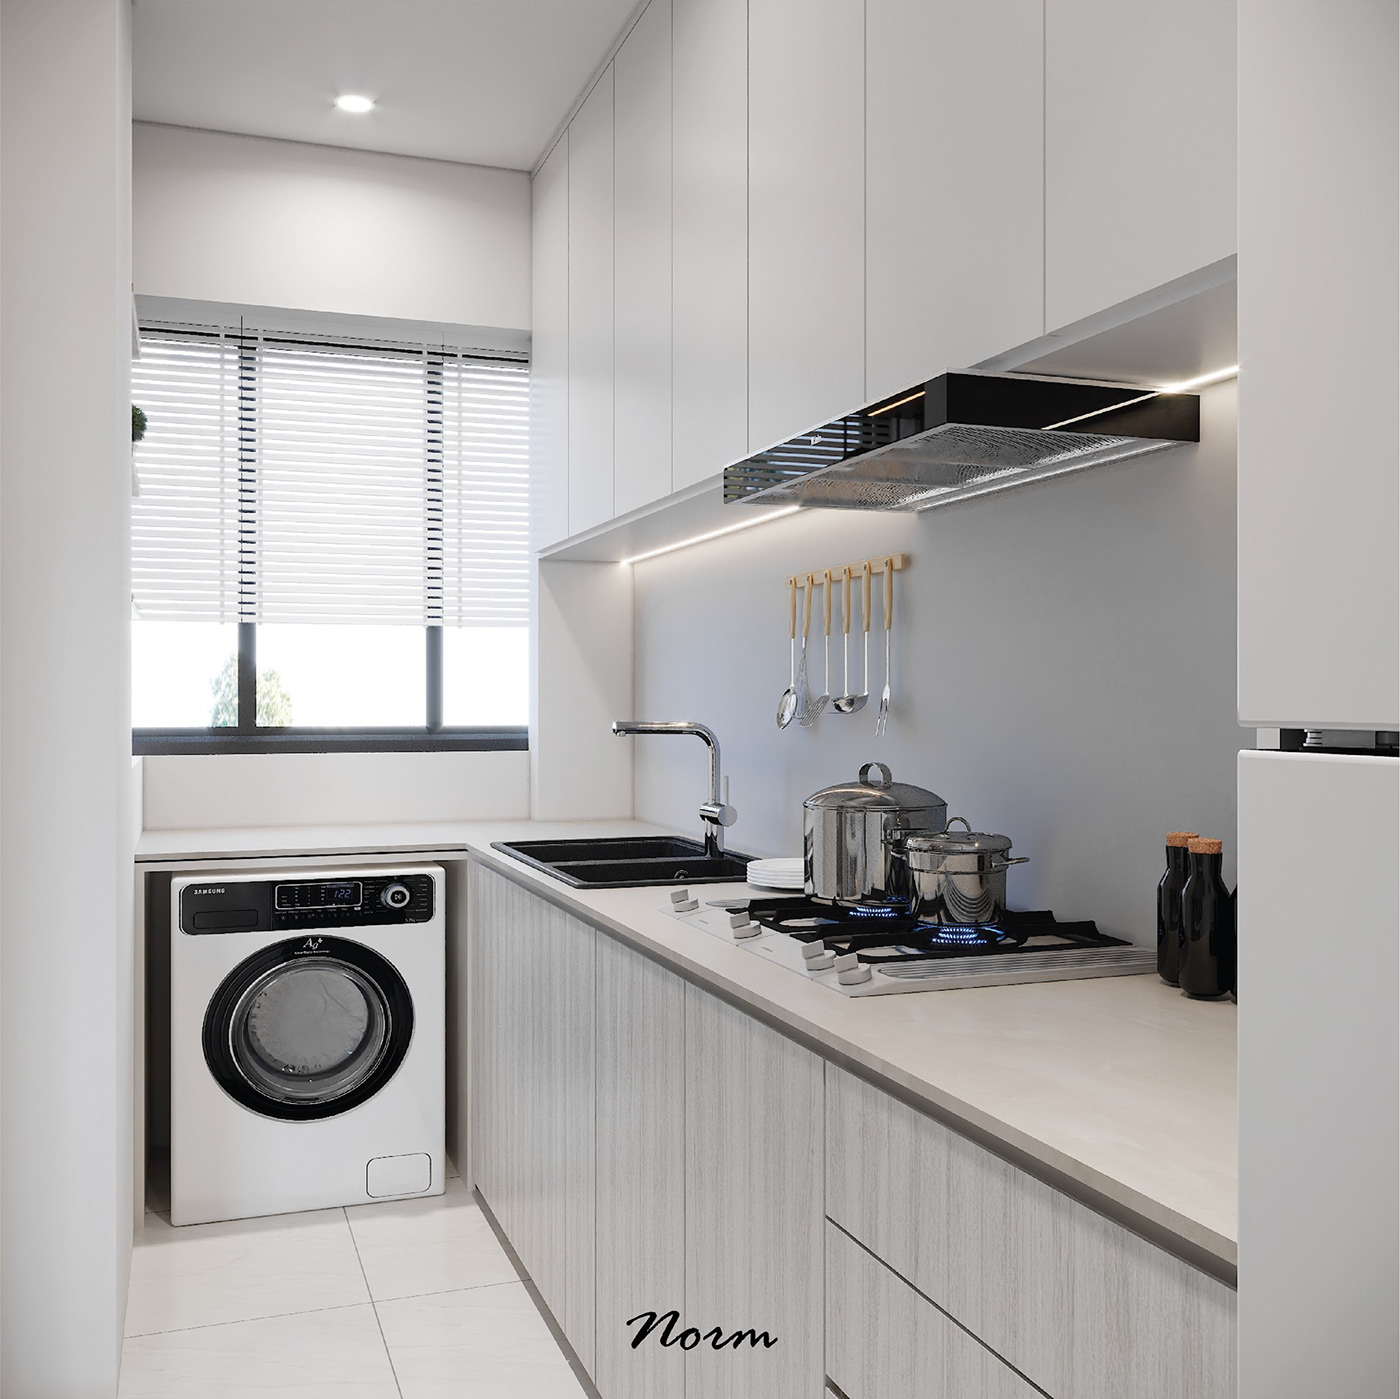 A small, independent kitchen with all necessary appliances. It has a medium window that allows plenty of light into the room. This room is brightened by the white furniture and lighting system.